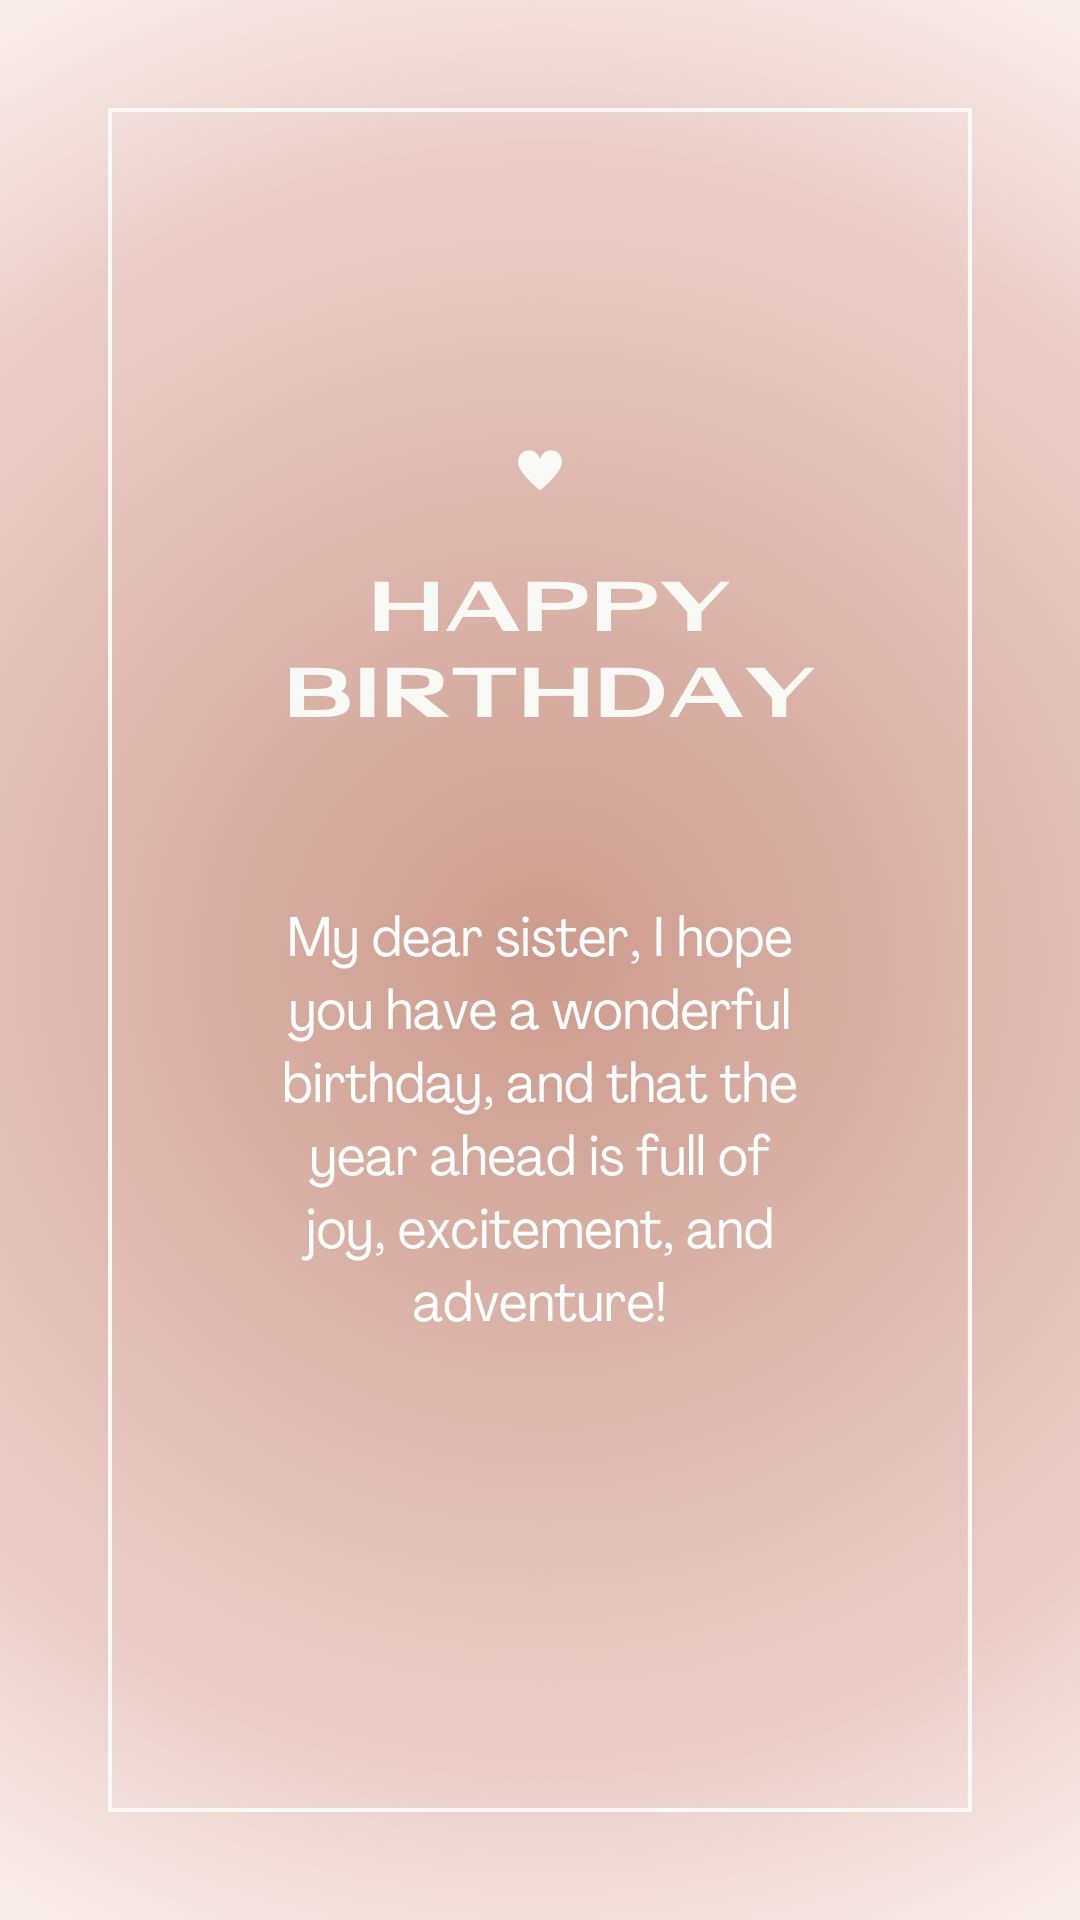 10+ Happy Birthday Images Sister - greetingspixel.com